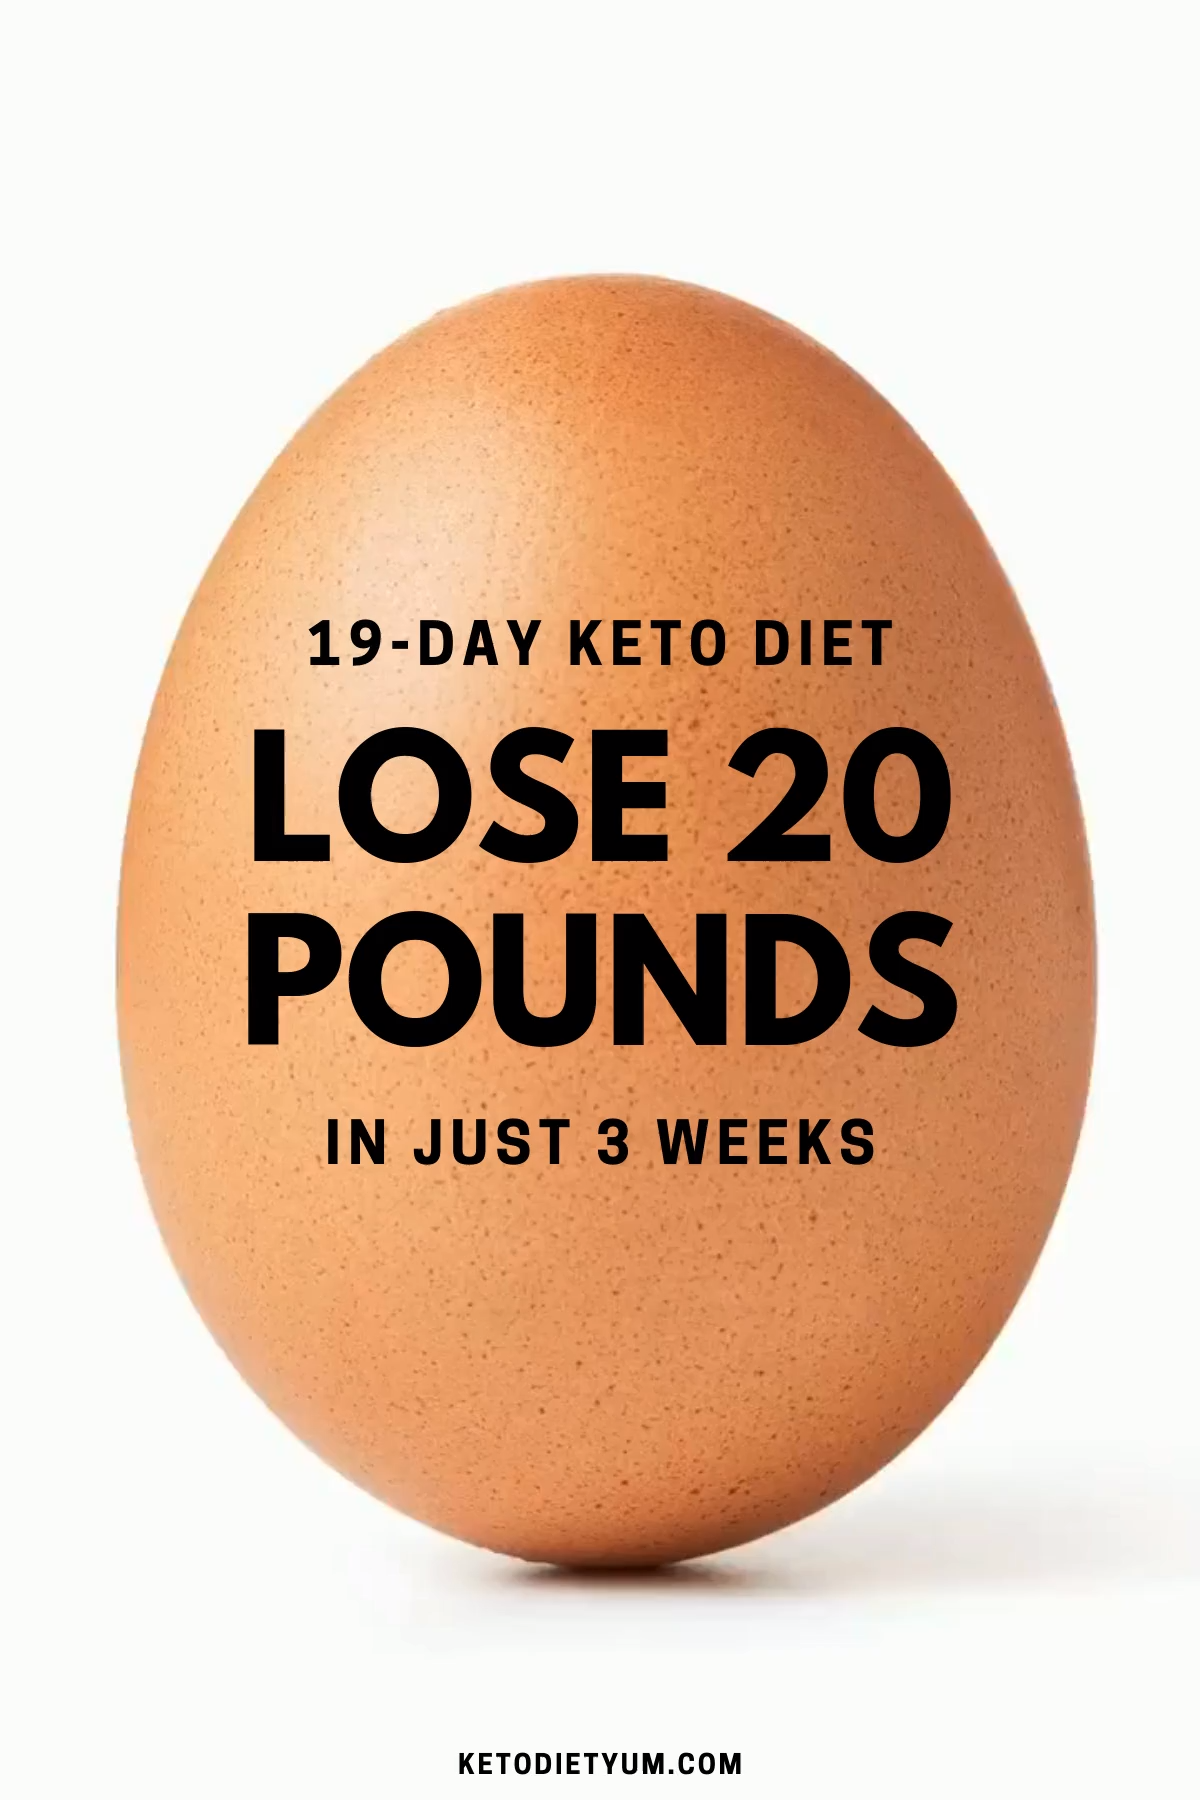 19-Day Keto Diet Plan to Lose Up to 20 Pounds -   13 diet Recipes menu ideas